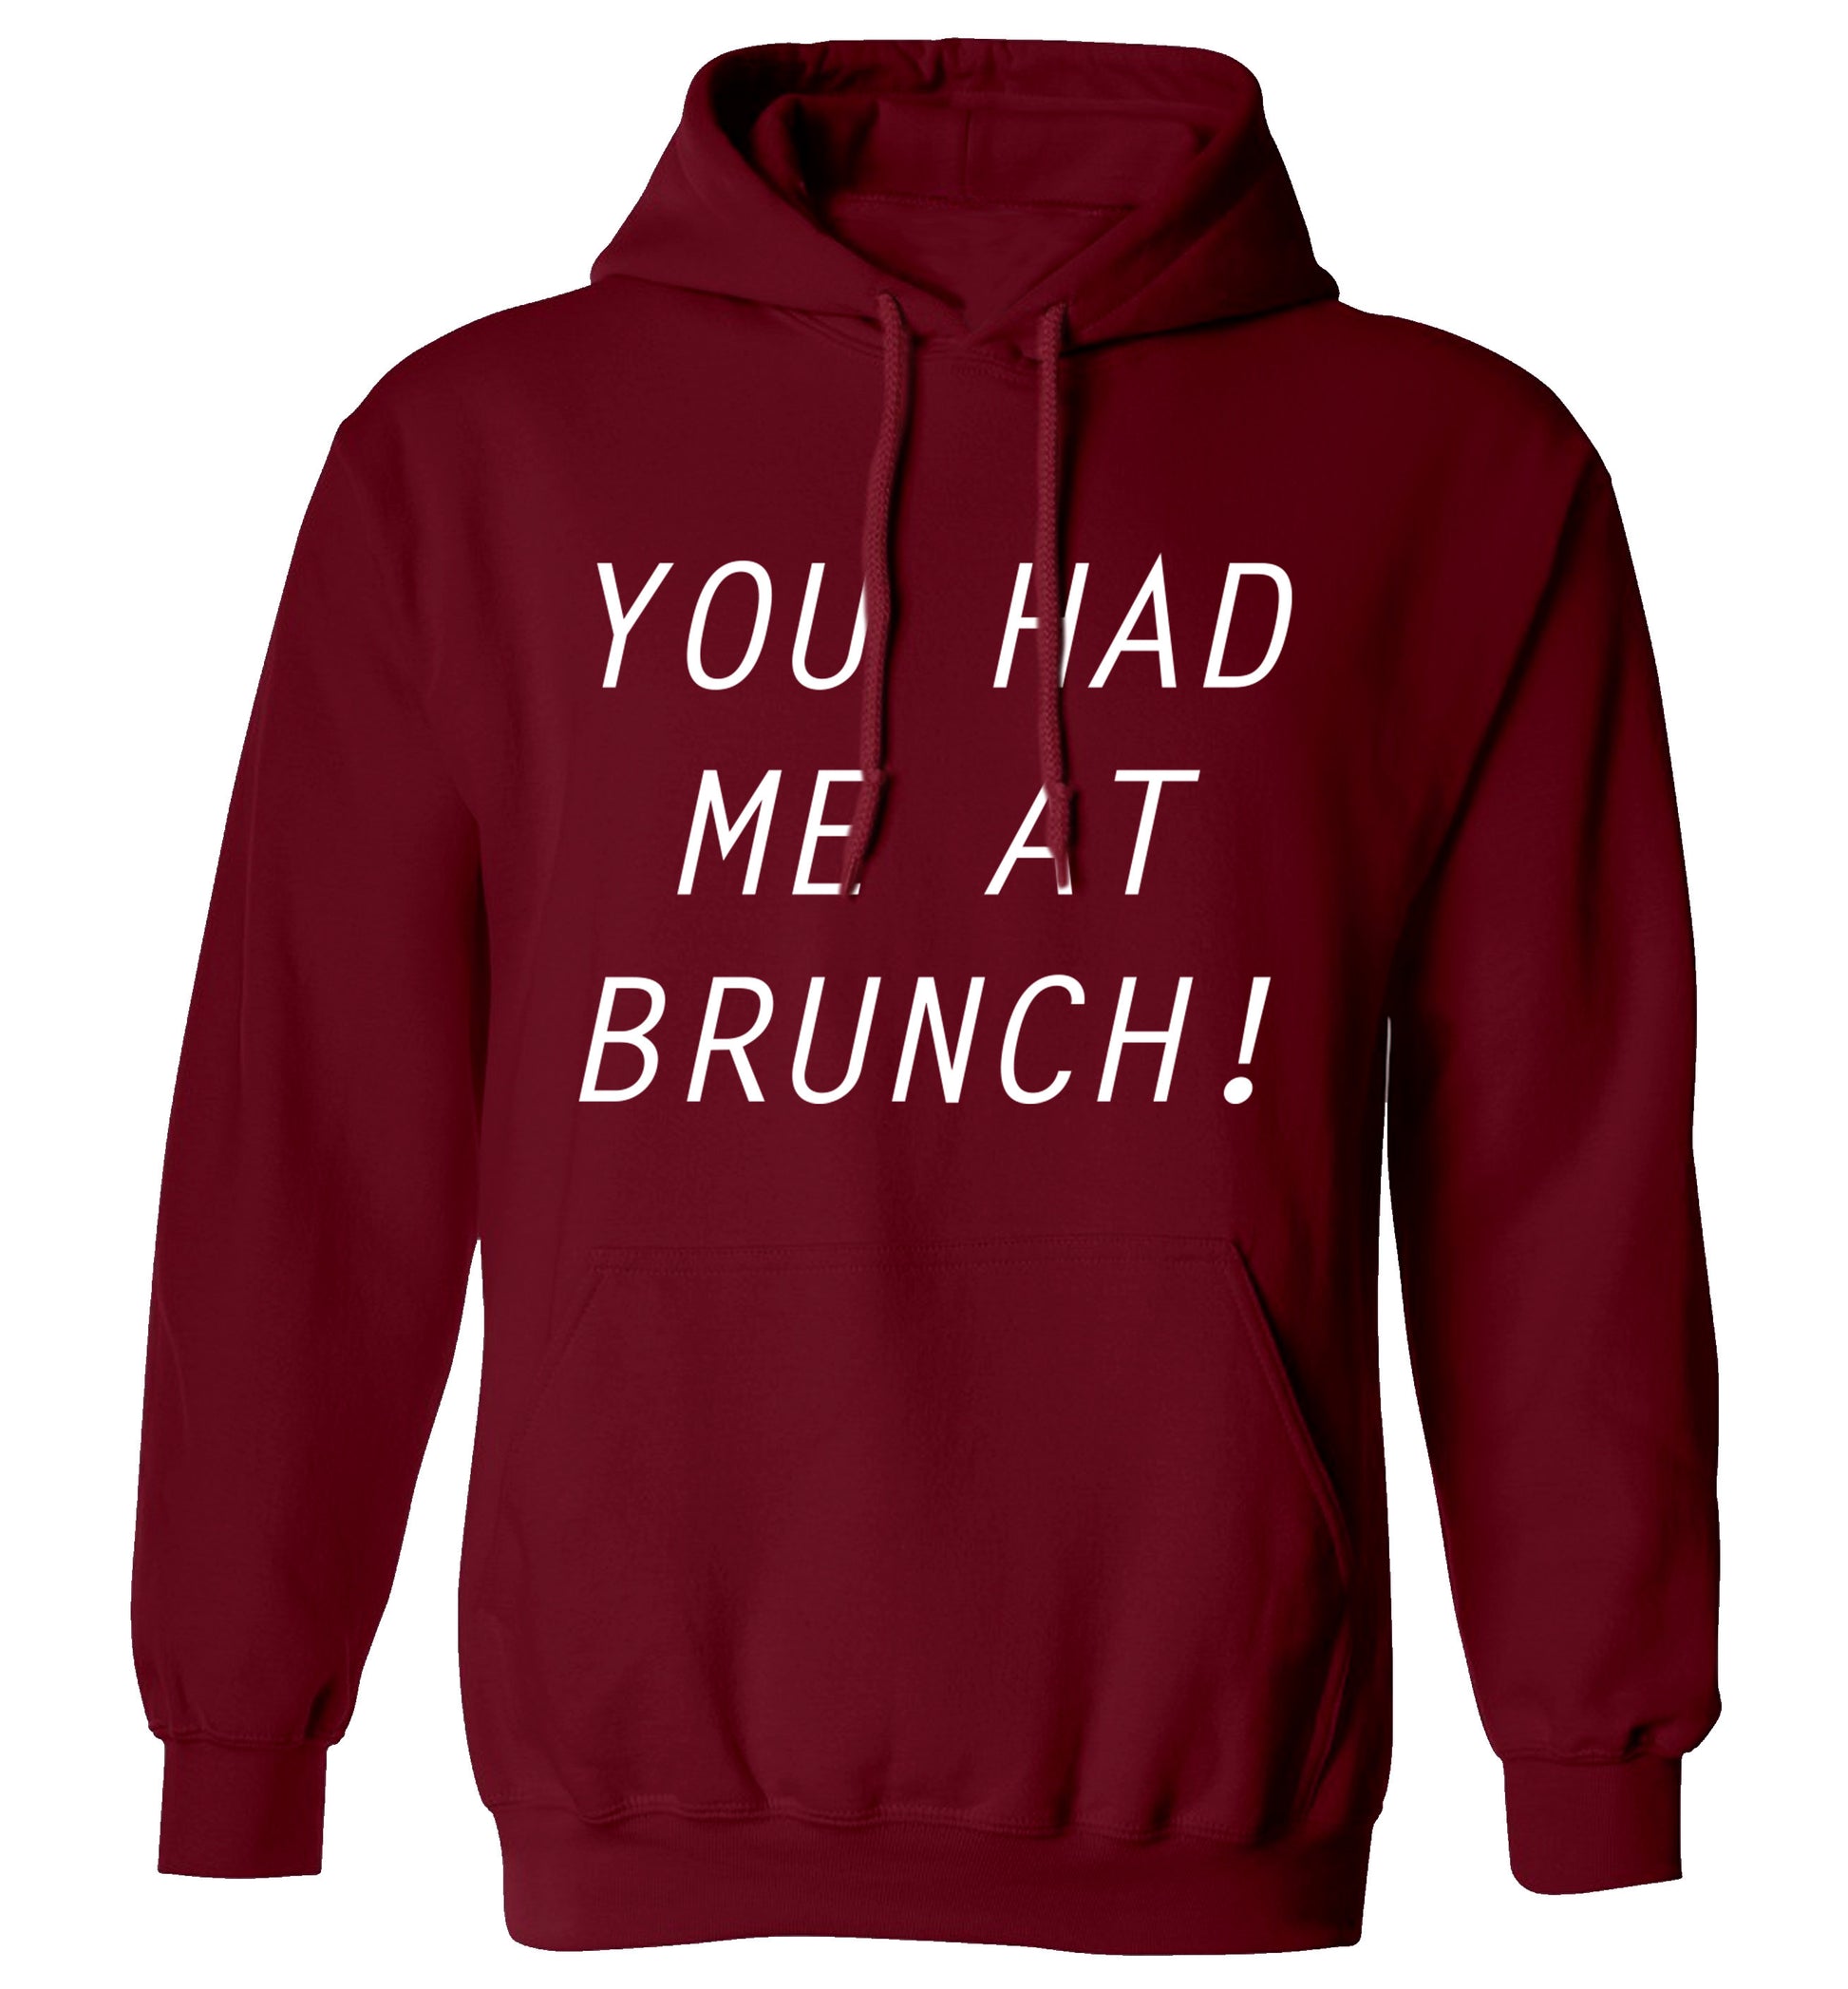 You had me at brunch adults unisex maroon hoodie 2XL